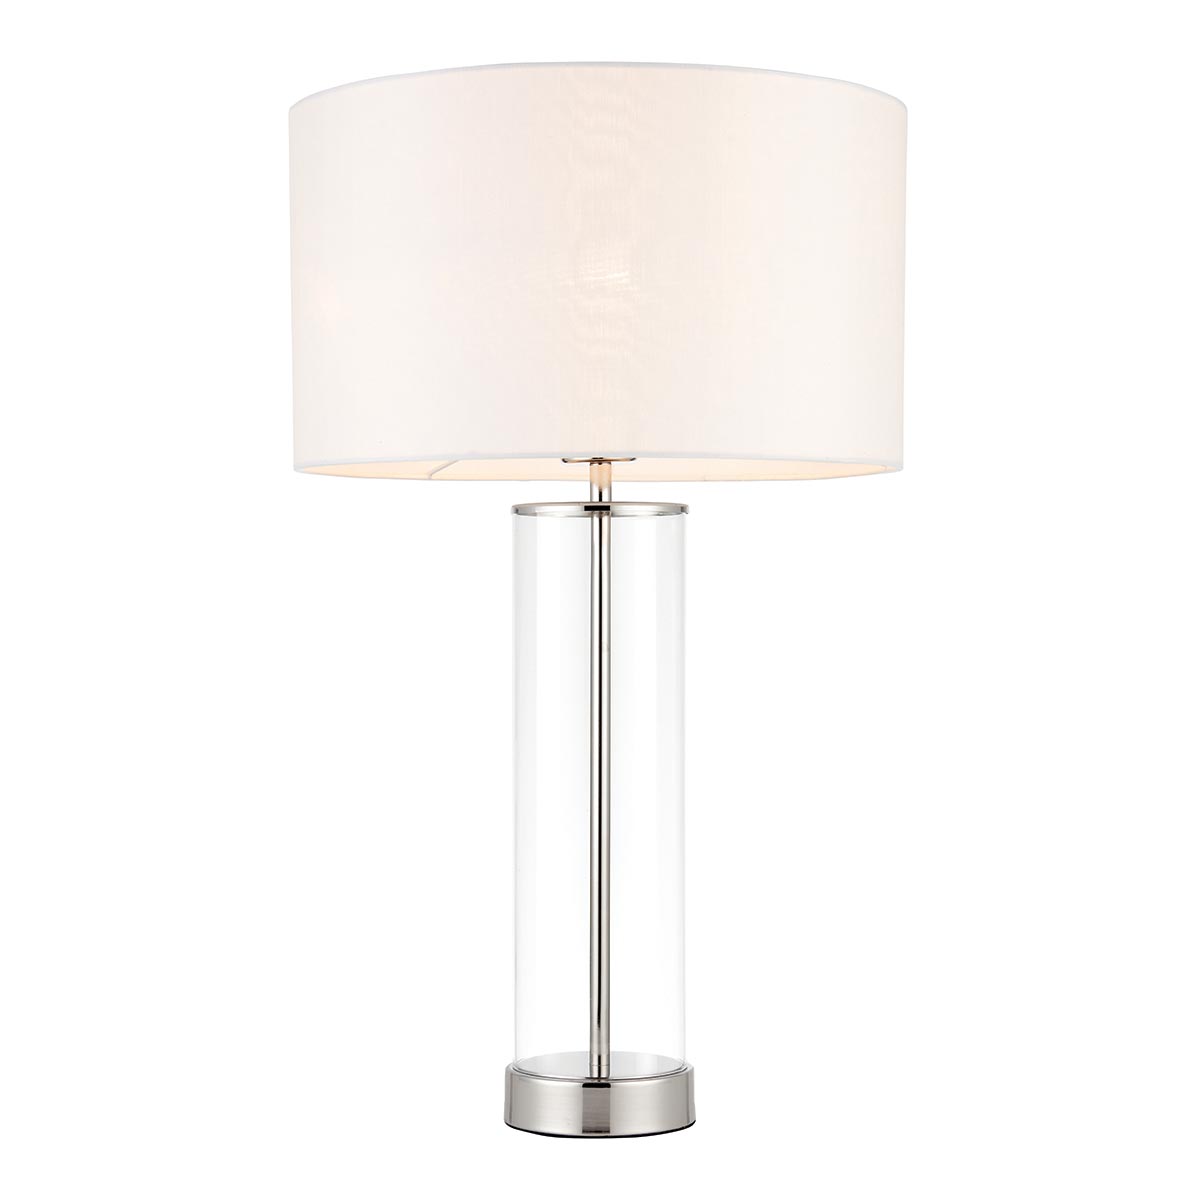 Endon Lessina Touch Dimmer Table Lamp Polished Nickel